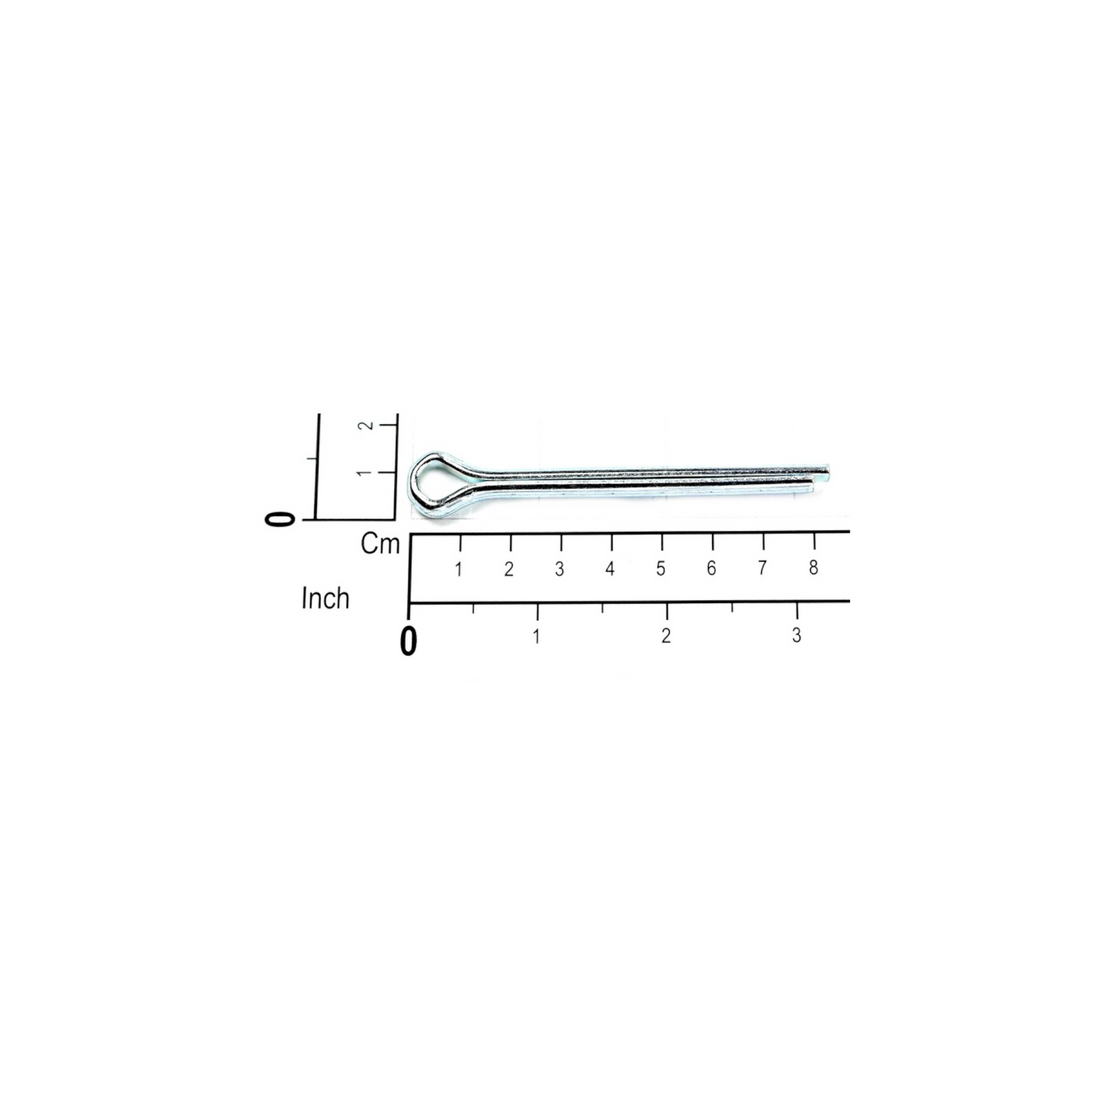 R&M Parts - Cotter Pin, Part Number: 2307932016